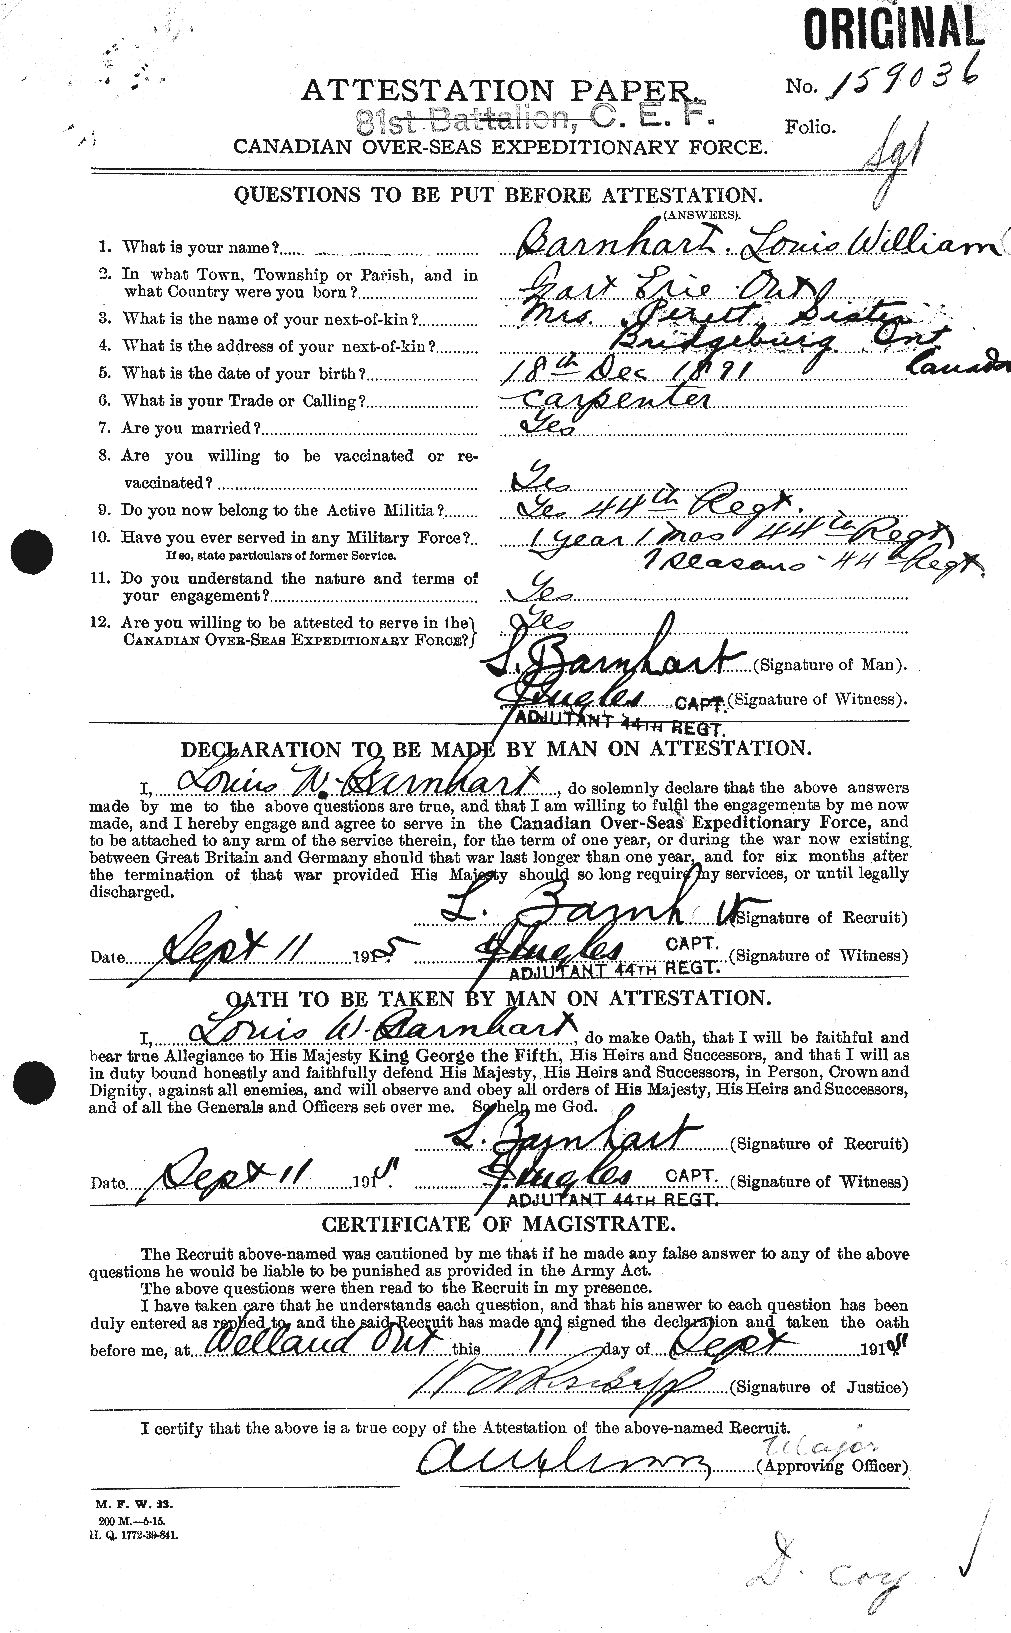 Personnel Records of the First World War - CEF 222809a